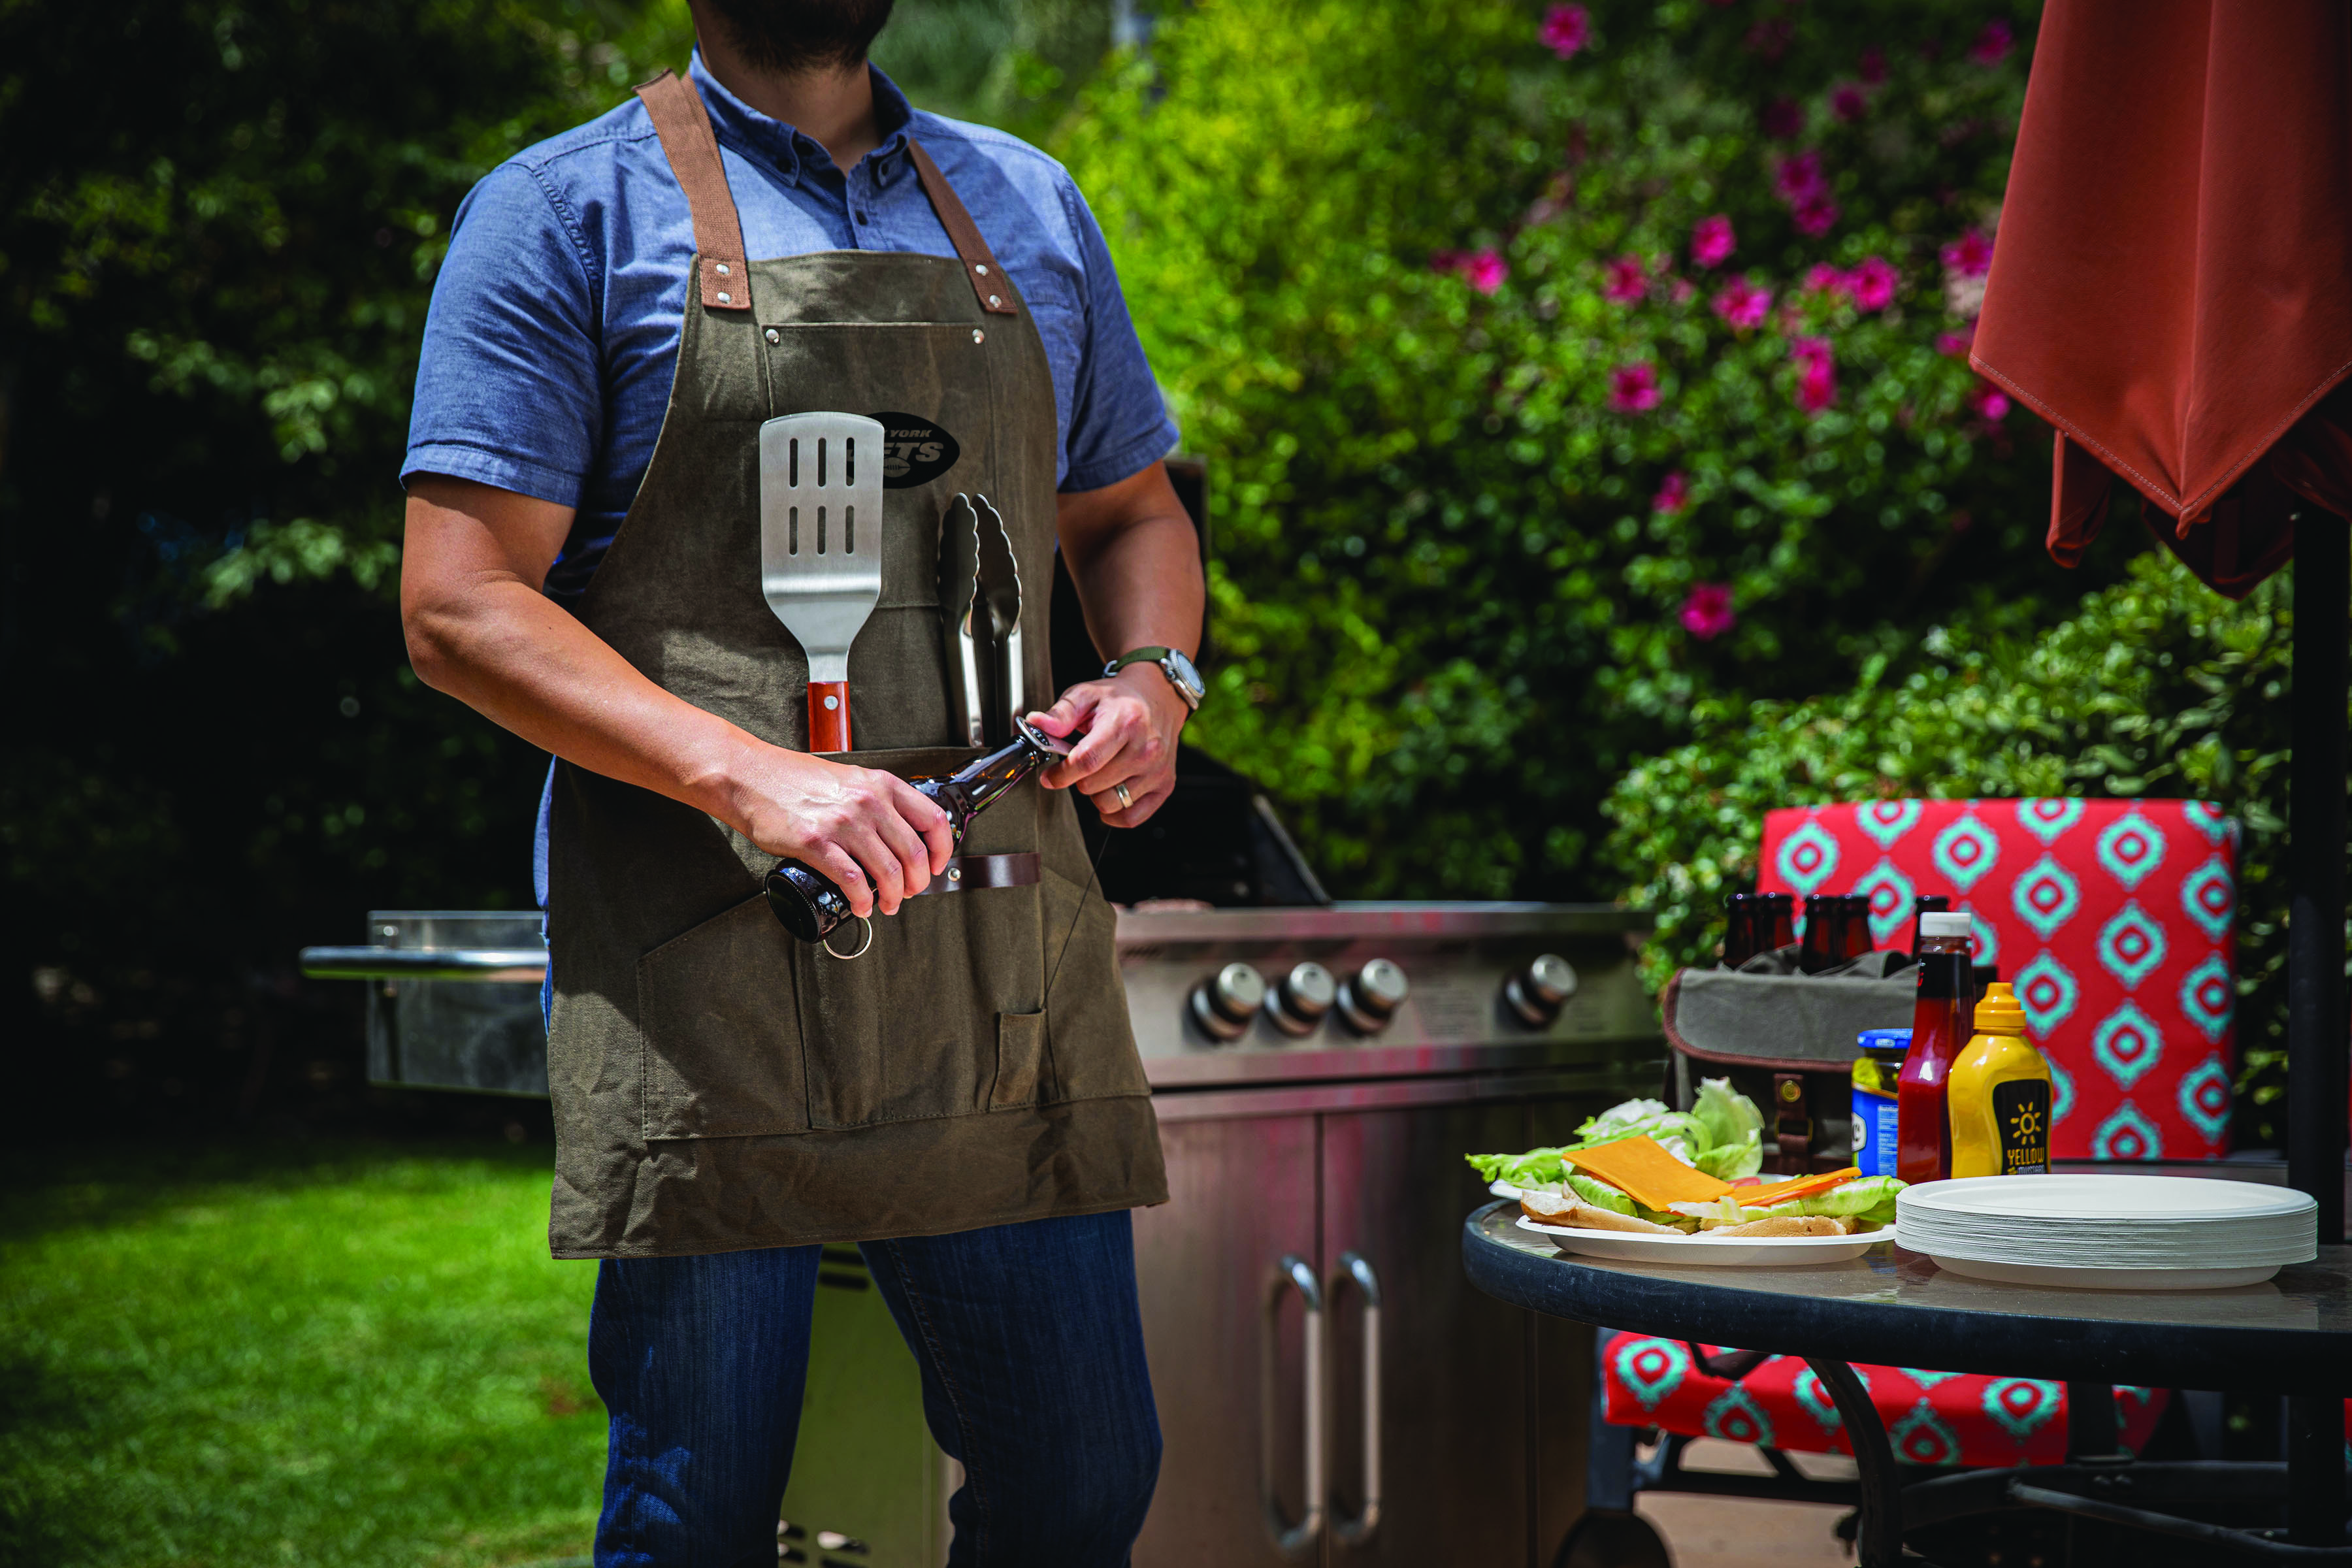 New York Jets - BBQ Apron with Tools & Bottle Opener